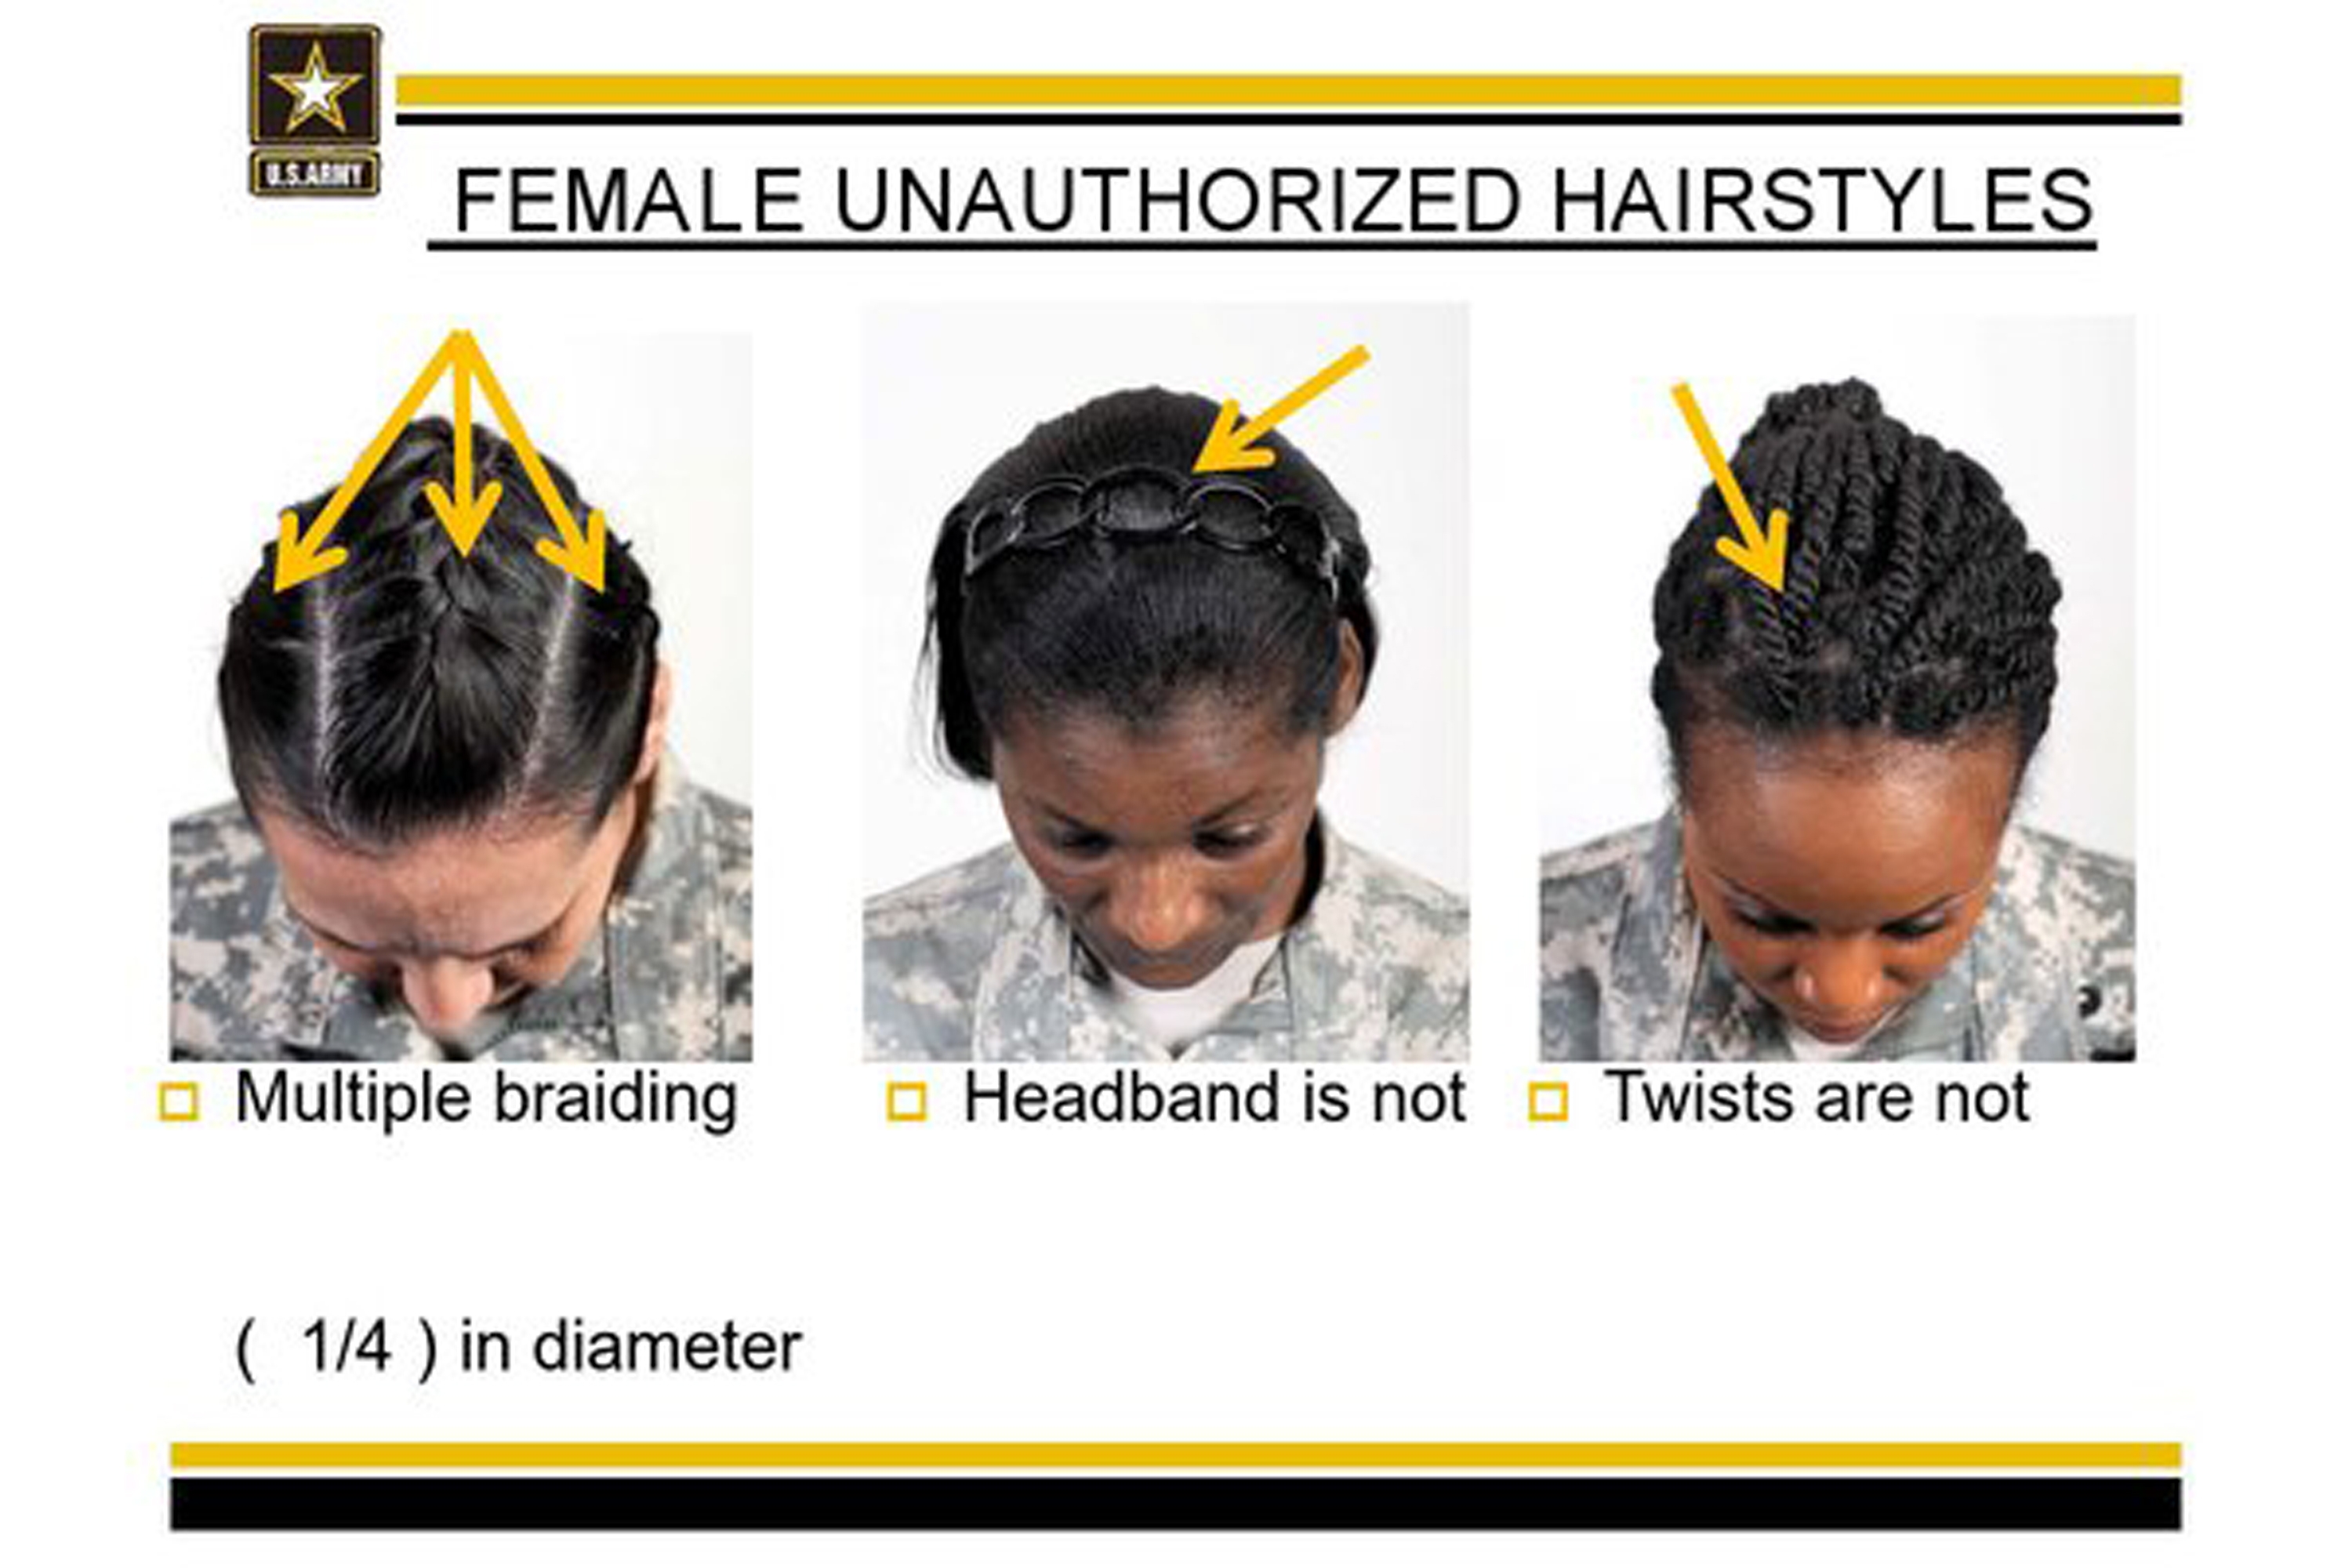 This undated image provided by the US Army shows new Army grooming regulations for females. (US Army/AP)